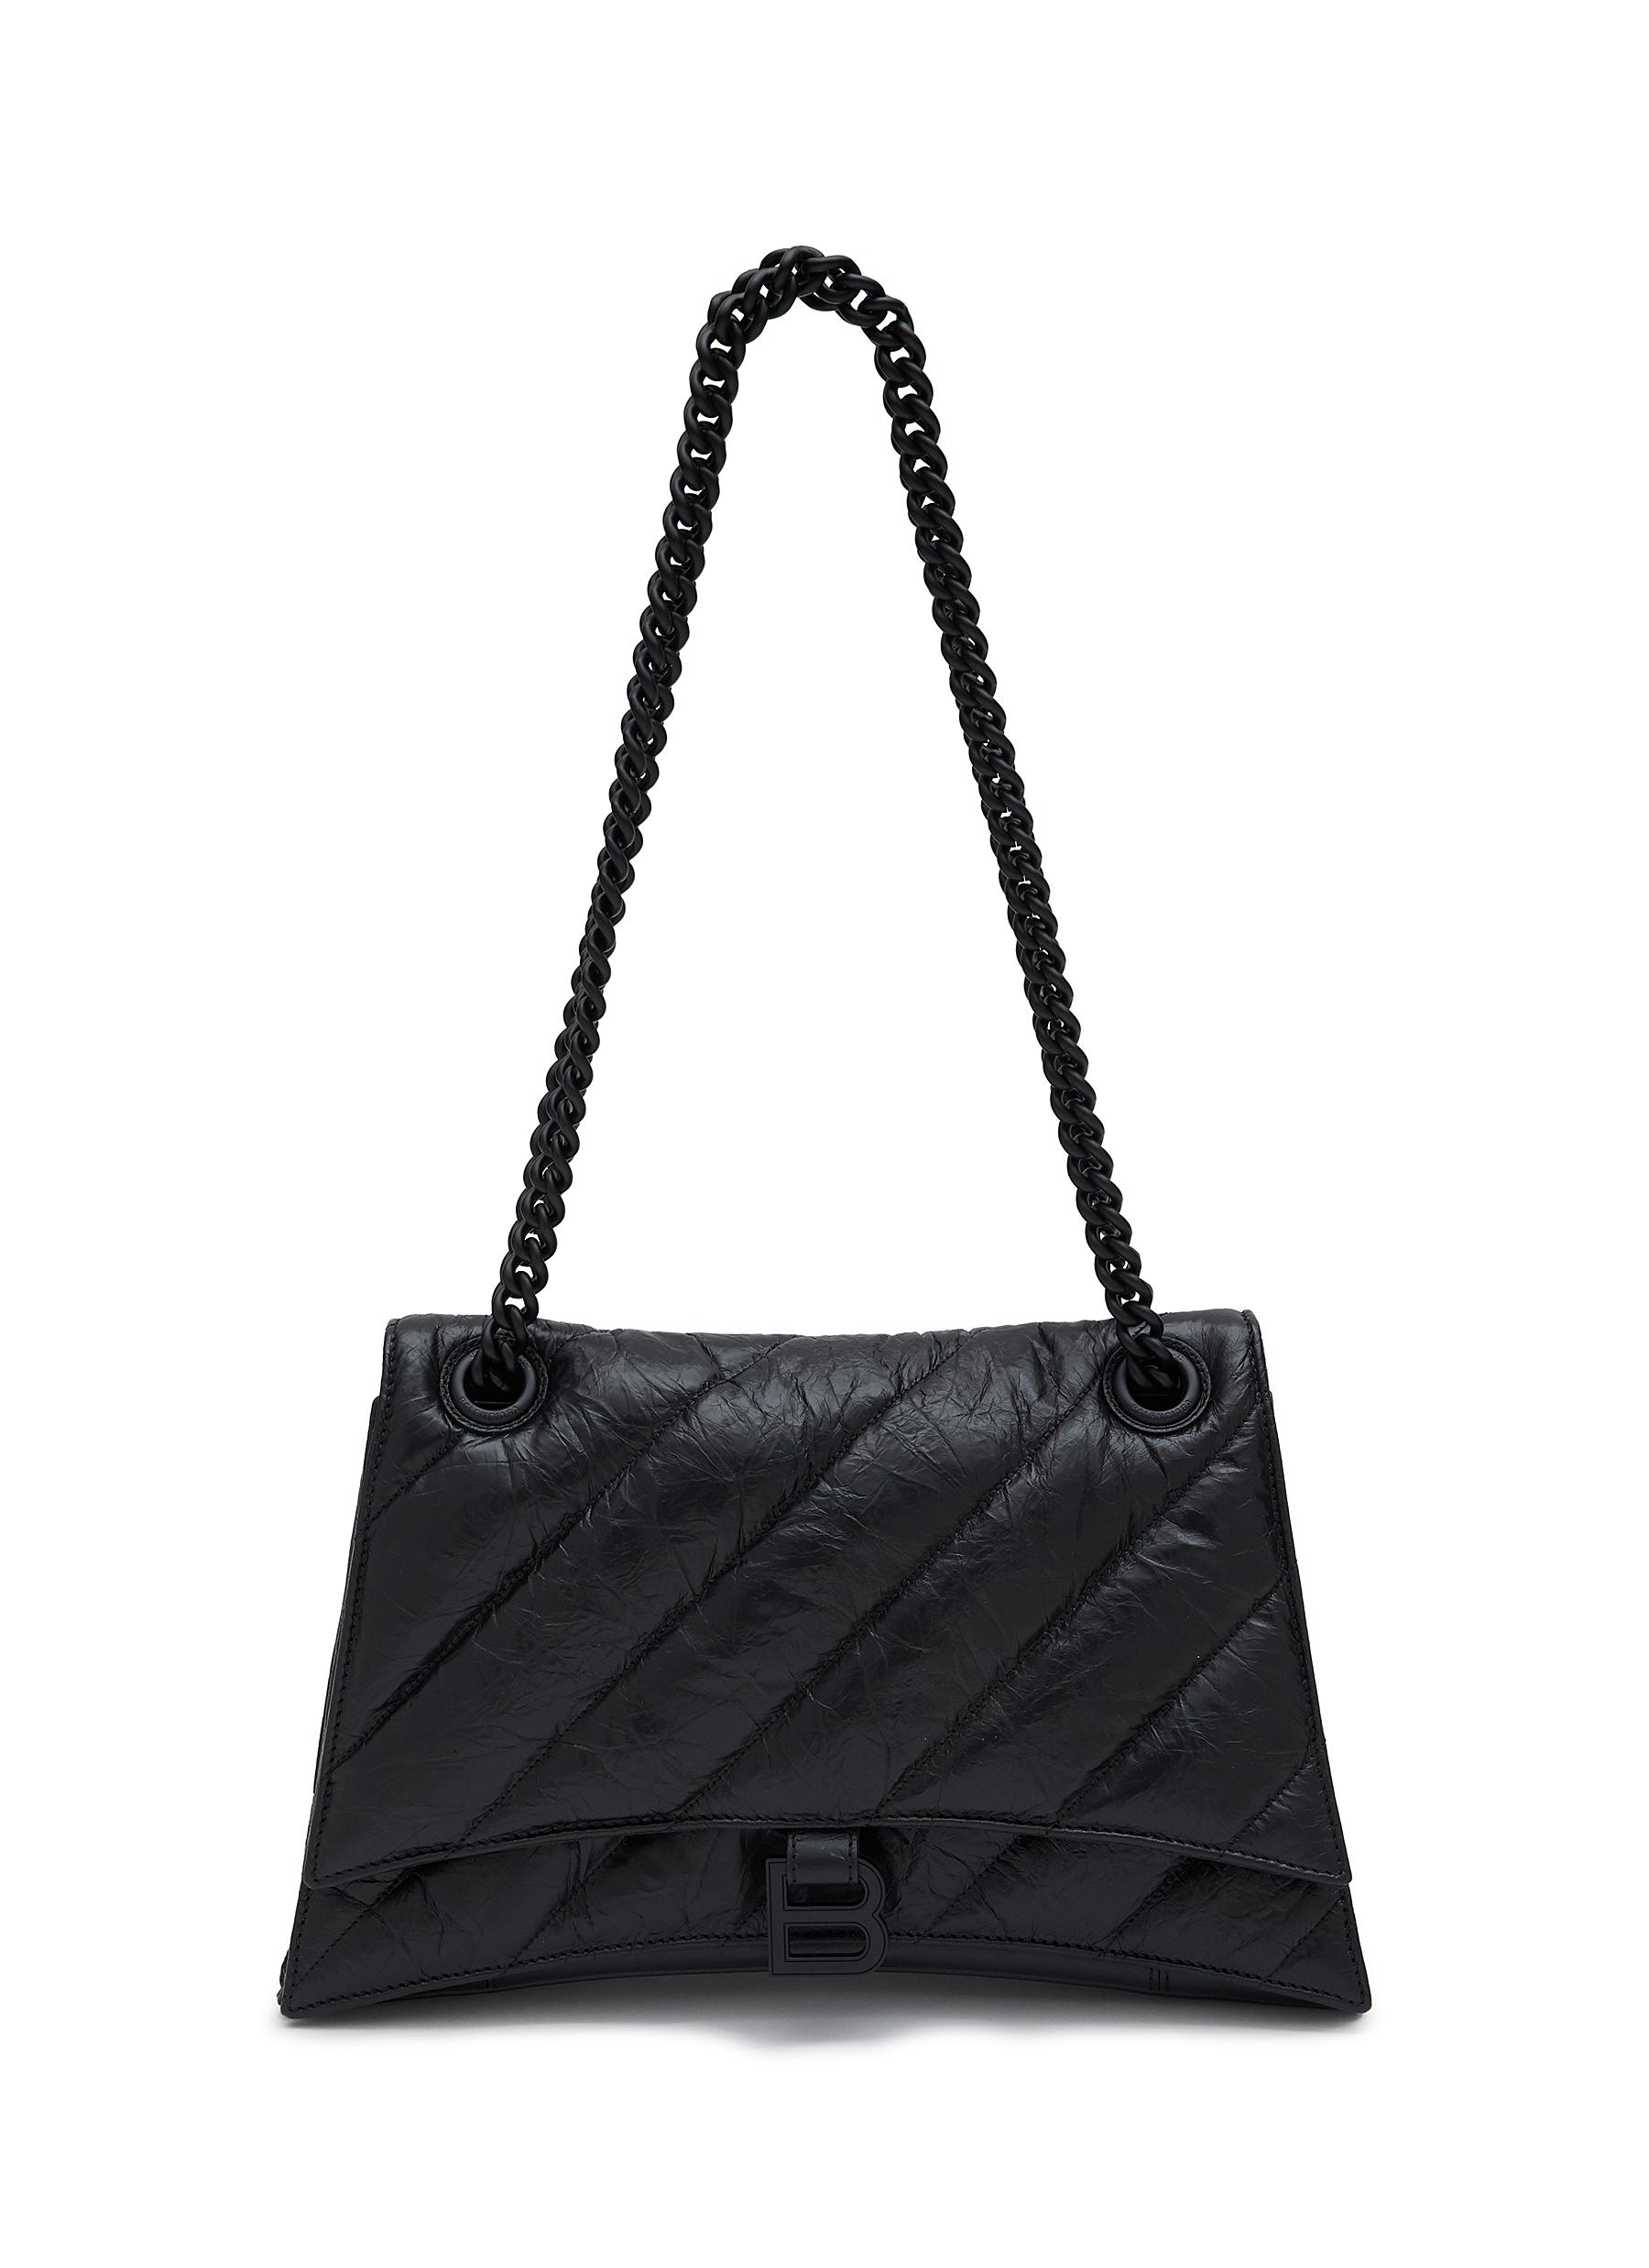 Medium Crush Quilted Leather Chain Bag